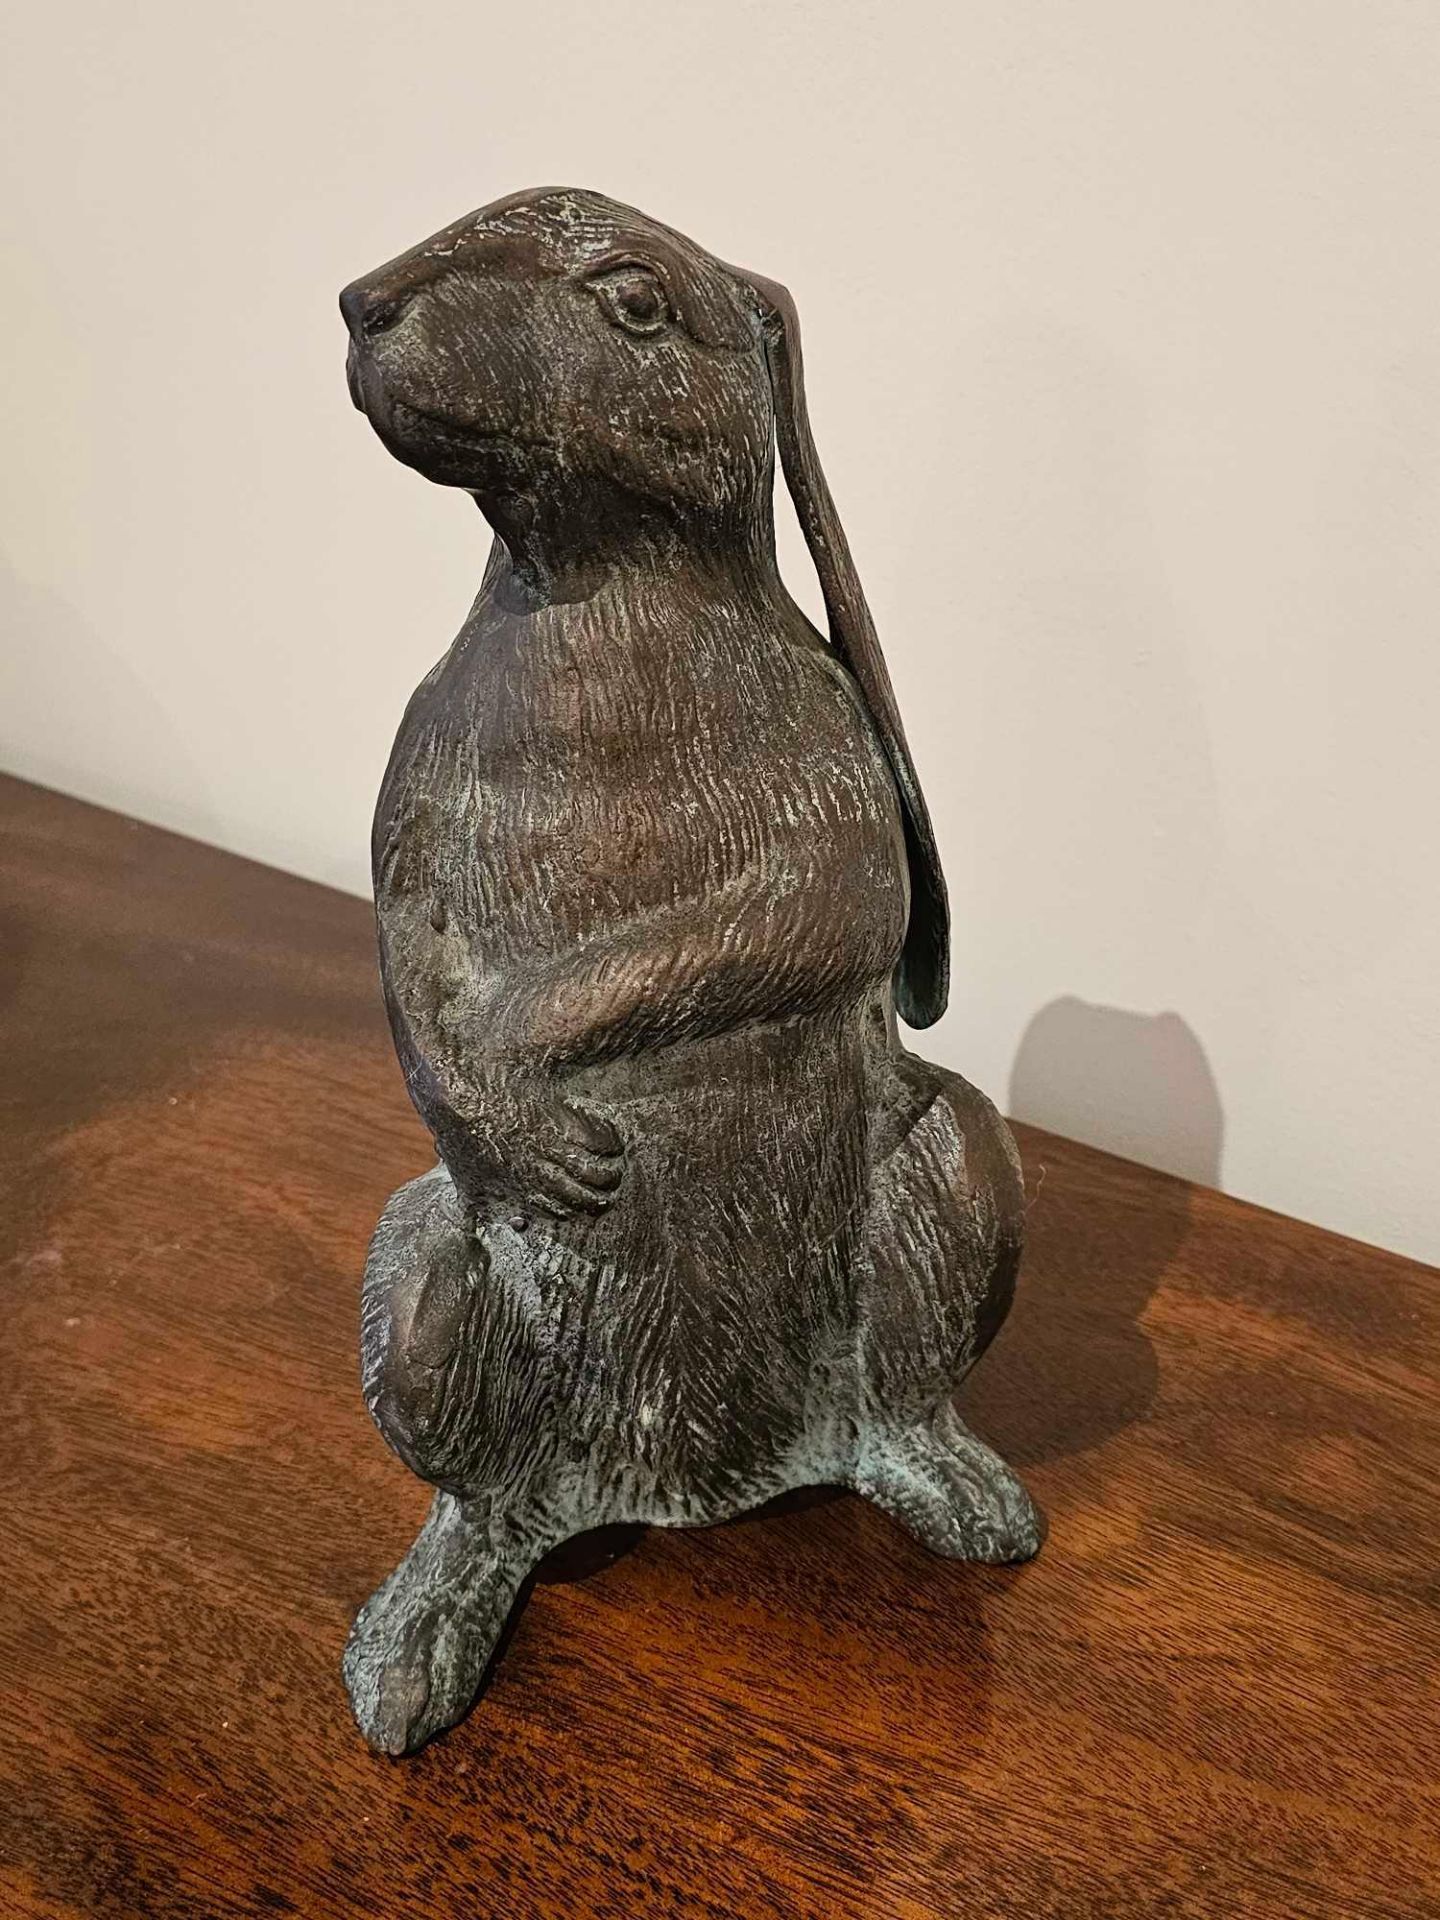 A Hollow Cast Figurine Of A Hare 27cm High - Image 2 of 3